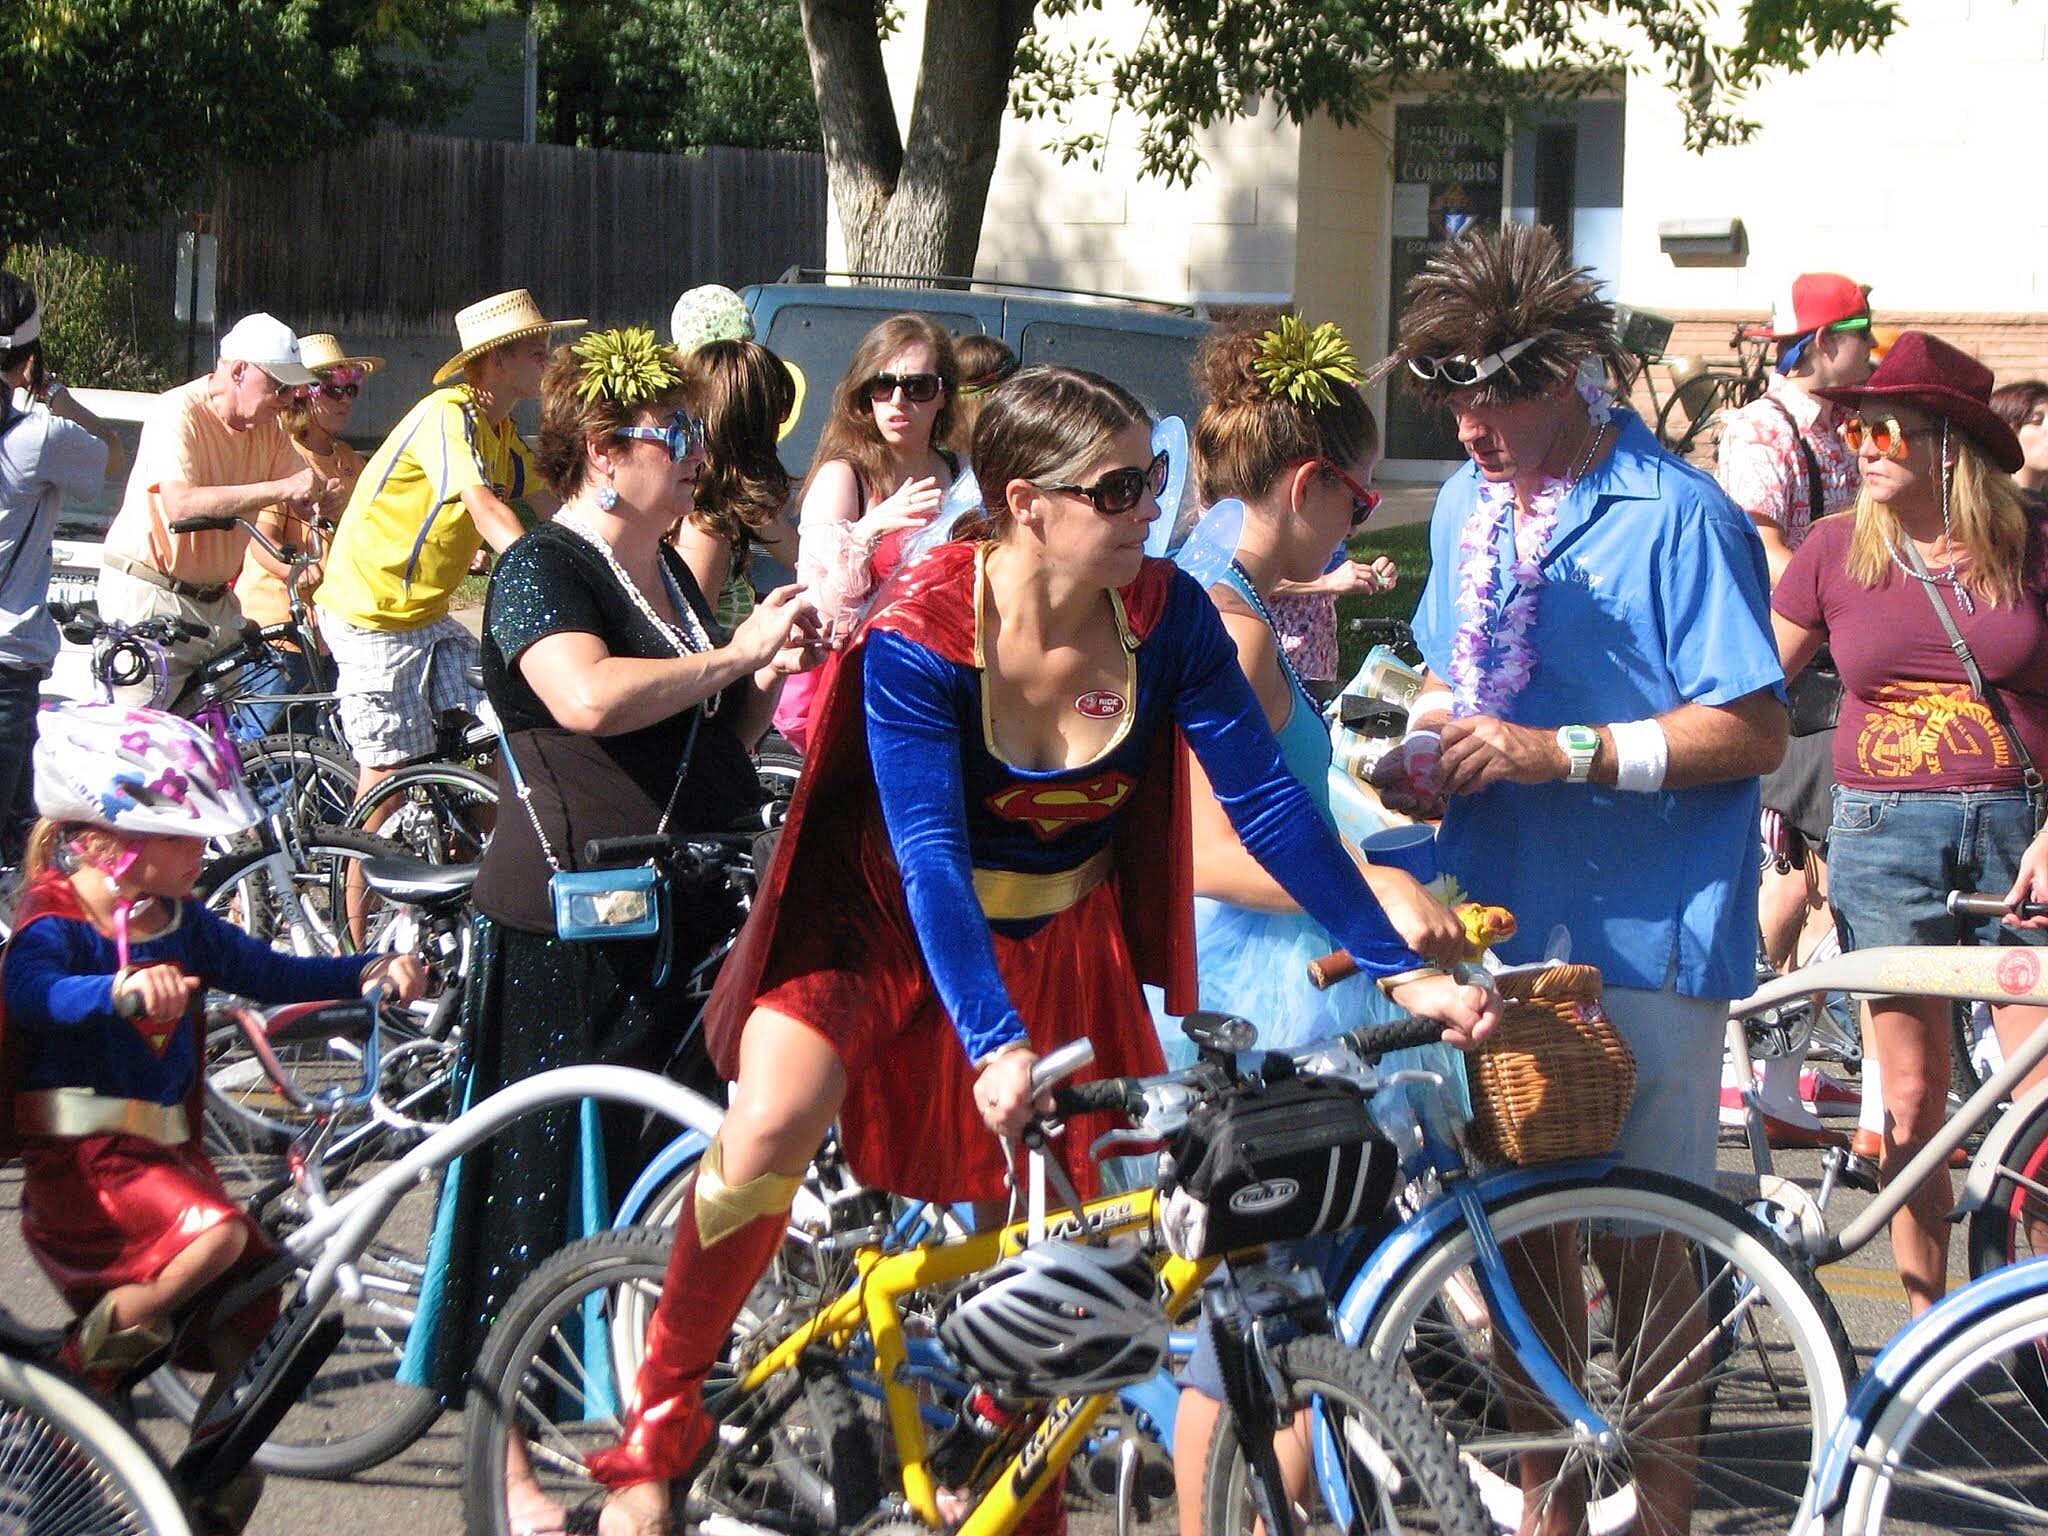 Tour de Fat Fort Collins The Best Parade on Earth And You Can Join